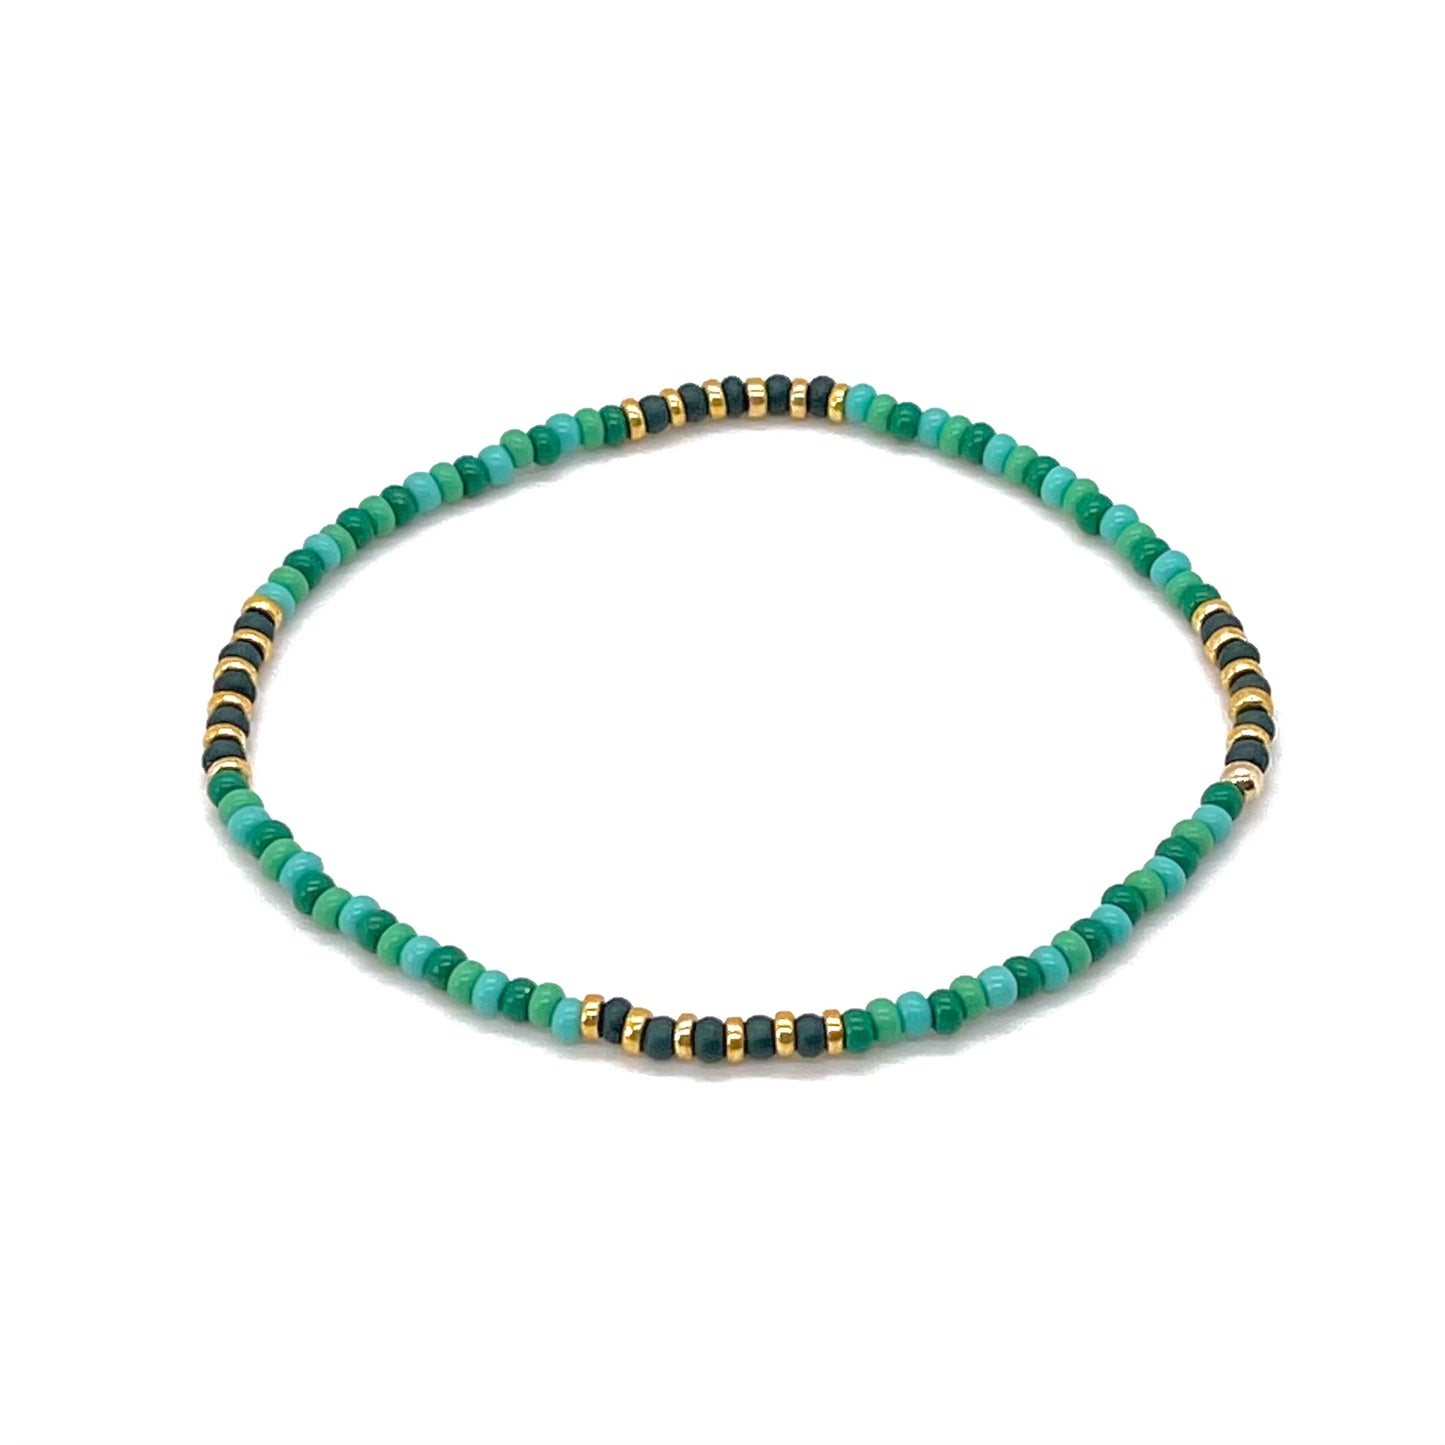 Beaded ankle bracelet with various green seed beads and gold tone accent beads. Fun summer stretch ankle bracelet.